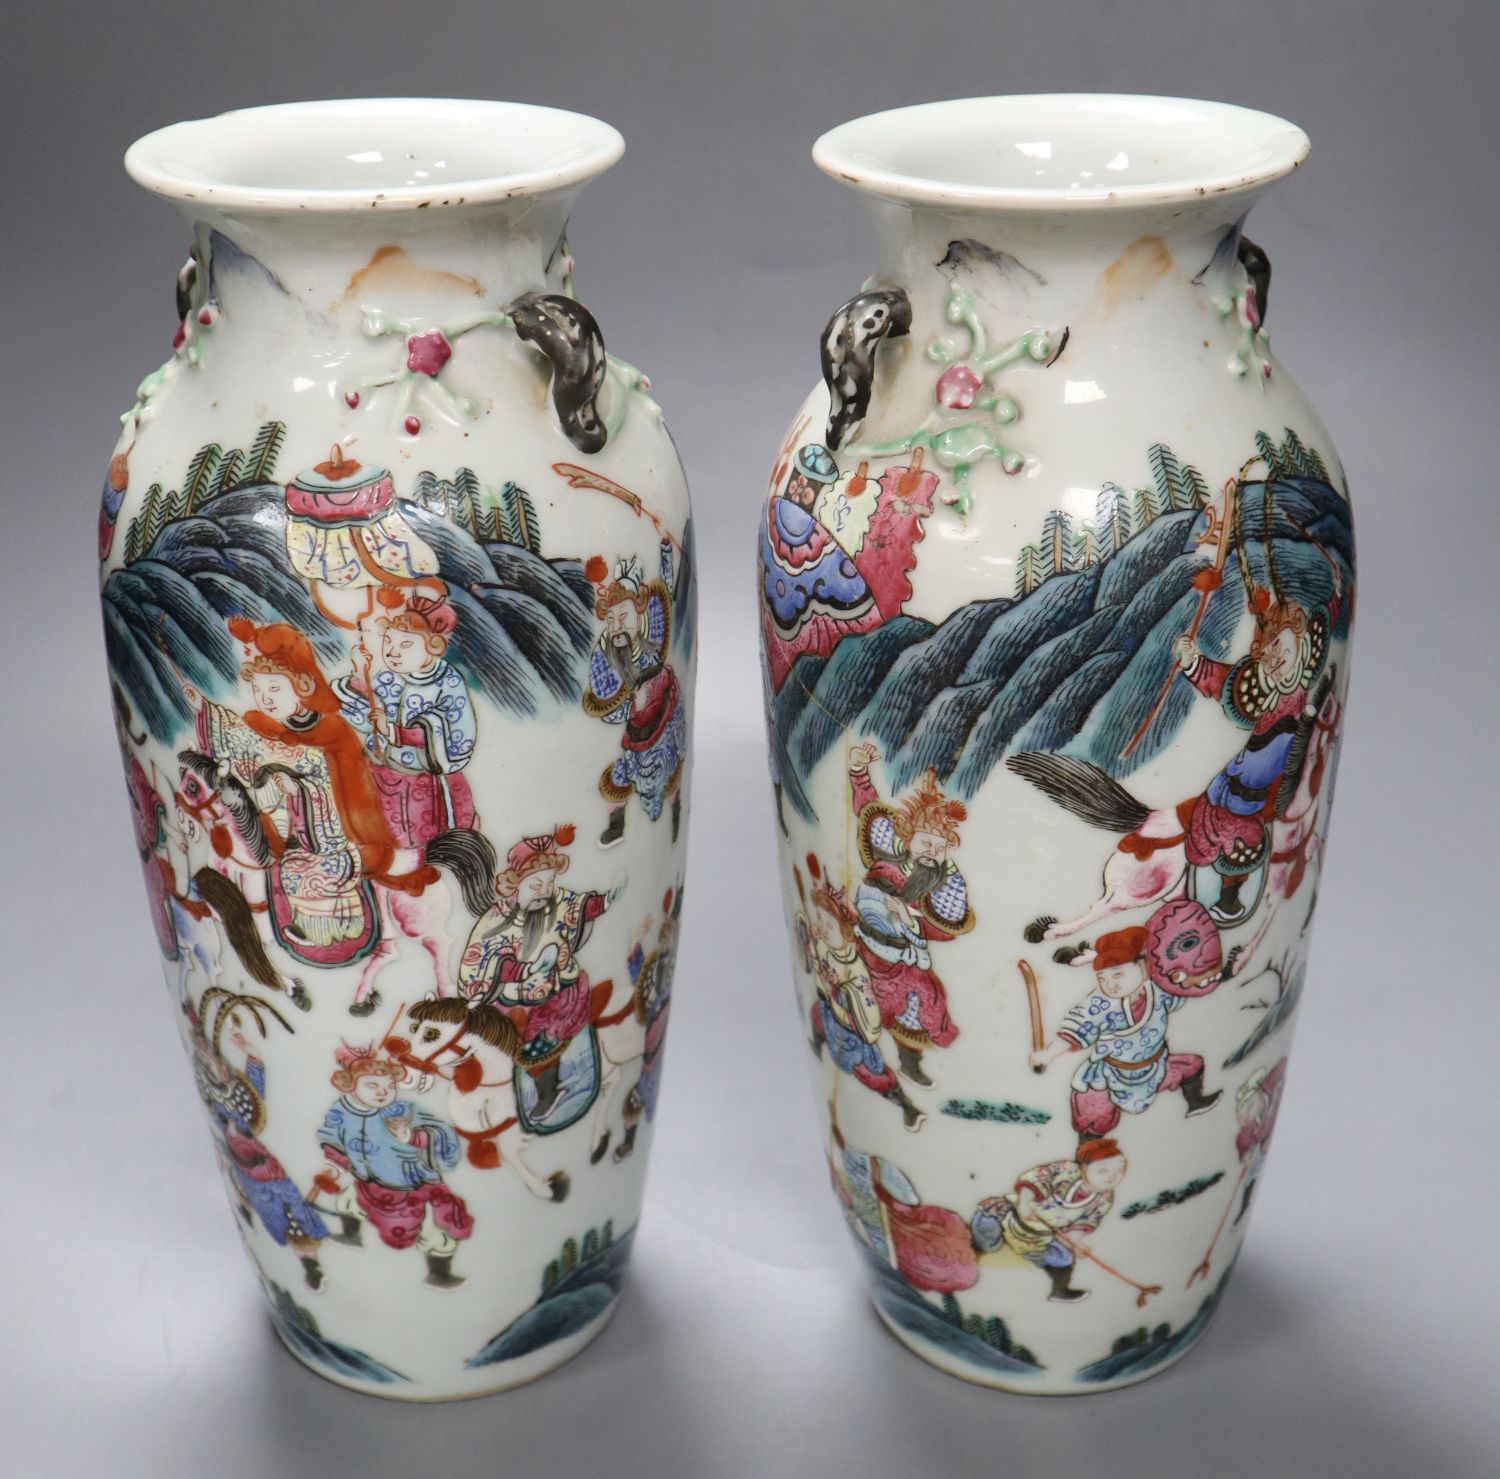 A pair of 19th century Chinese famille rose porcelain vases, height 29cm